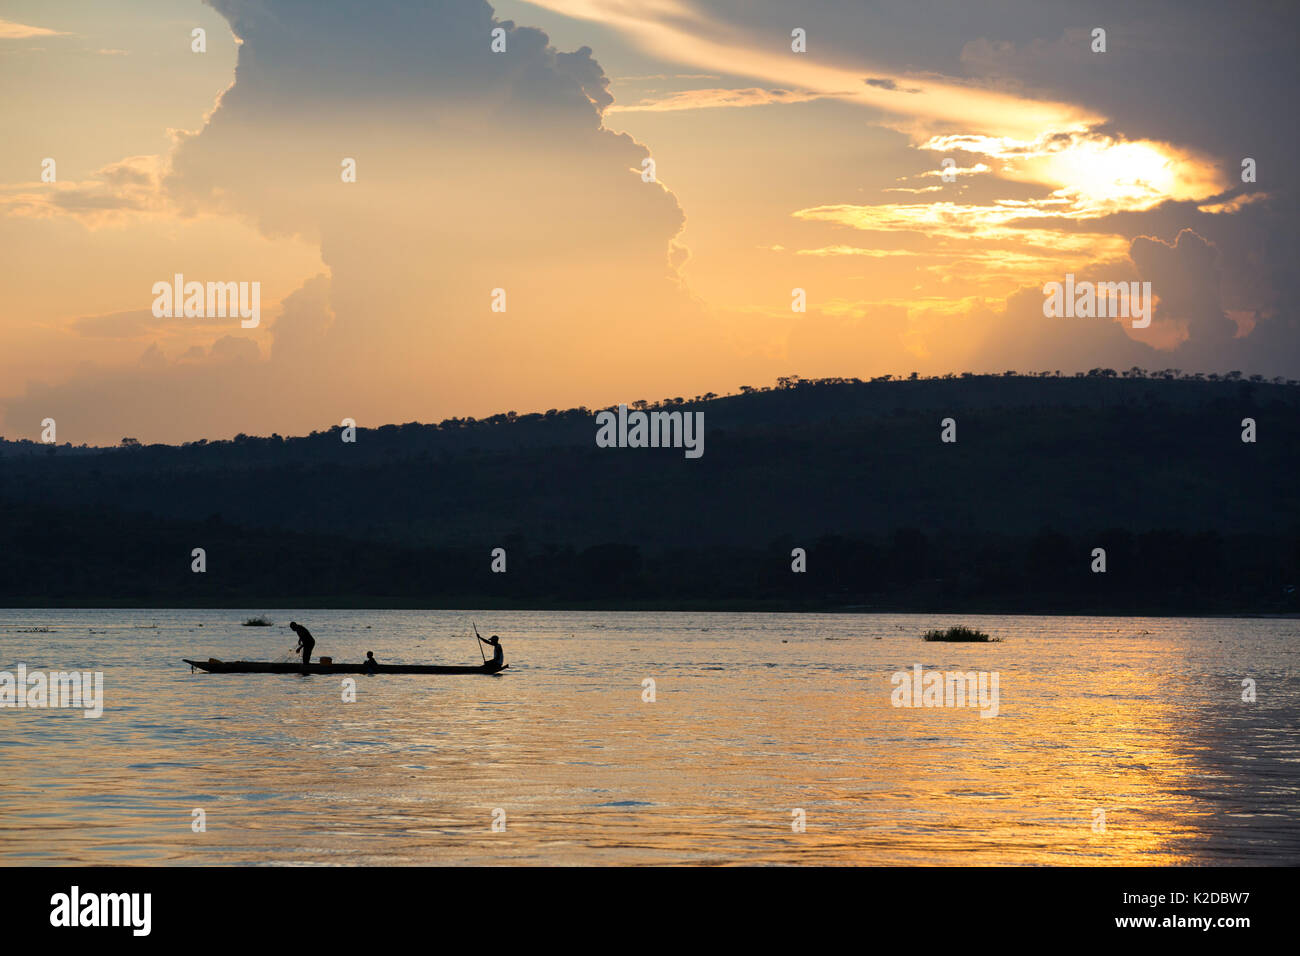 People crossing Congo river with goods to trade, the river is the border between Congo Brazzaville and Democratic Republic of Congo (DRC) Stock Photo